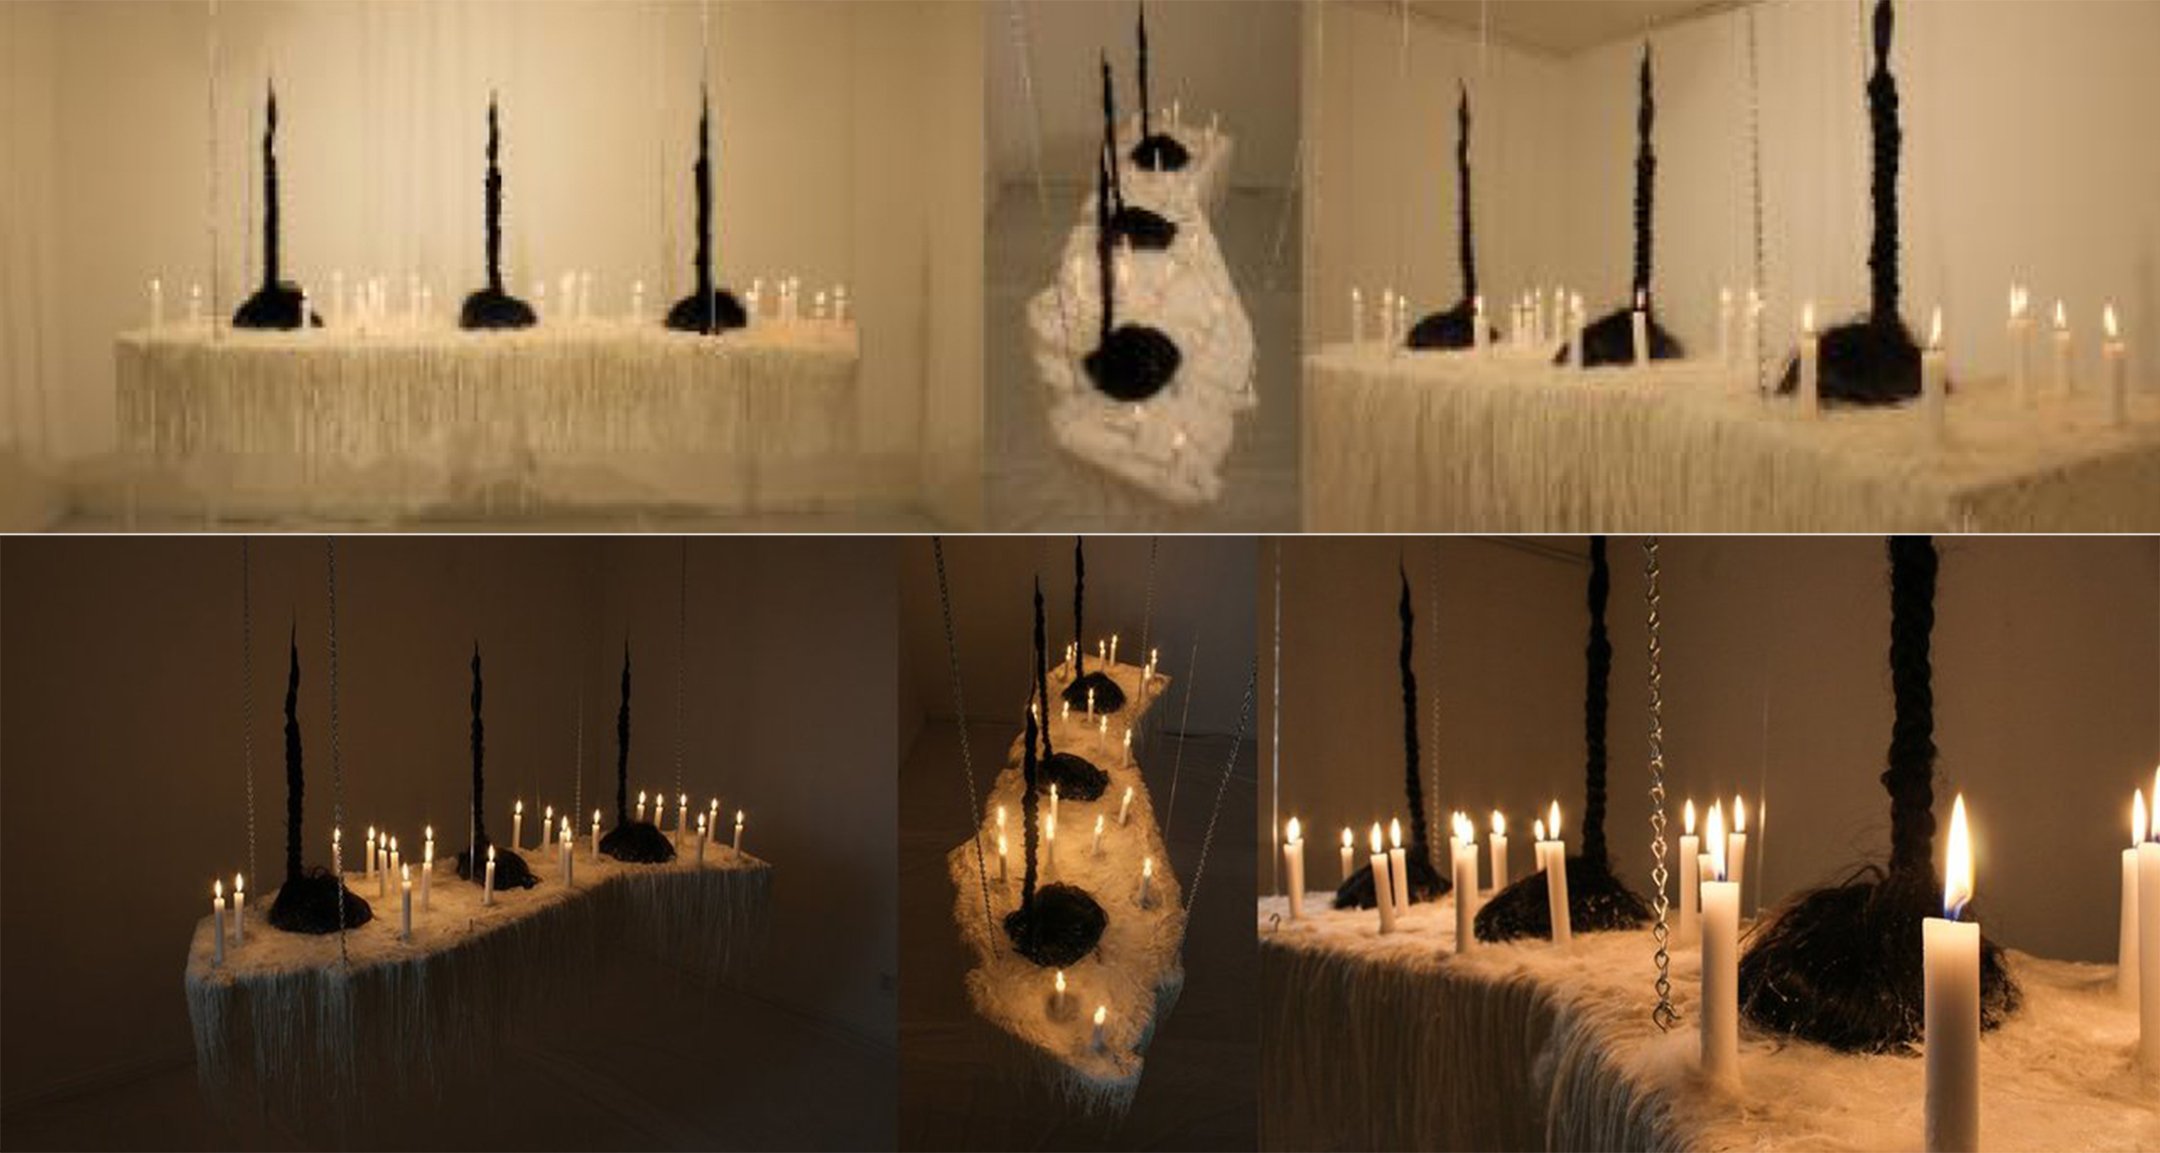 six images, three by three, showing a sculpture in the shape of california covered in wax and lit candles